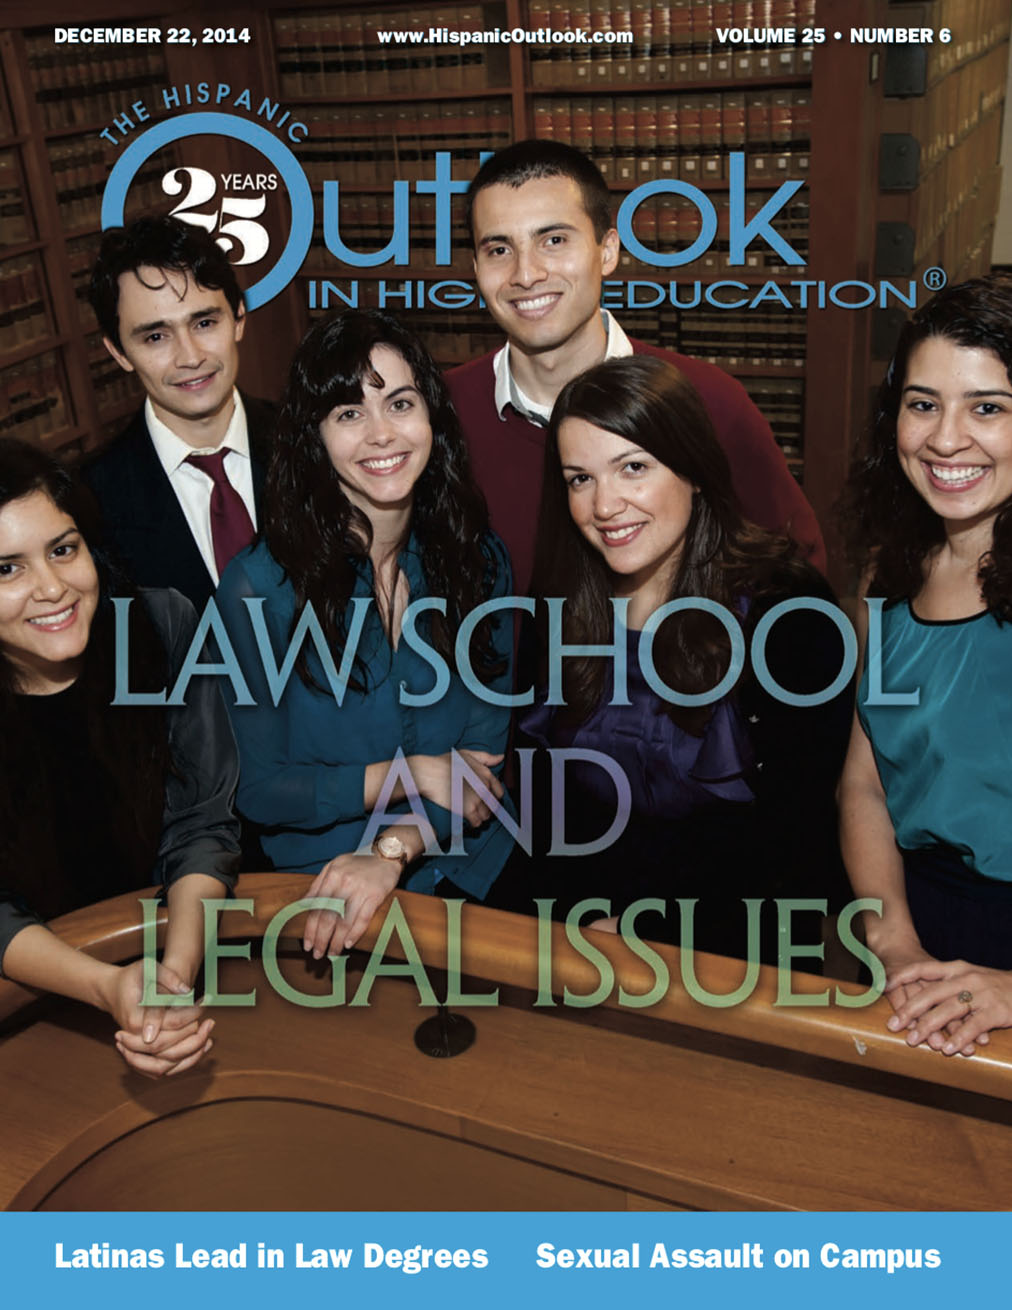 Law Schools and Legal Issues